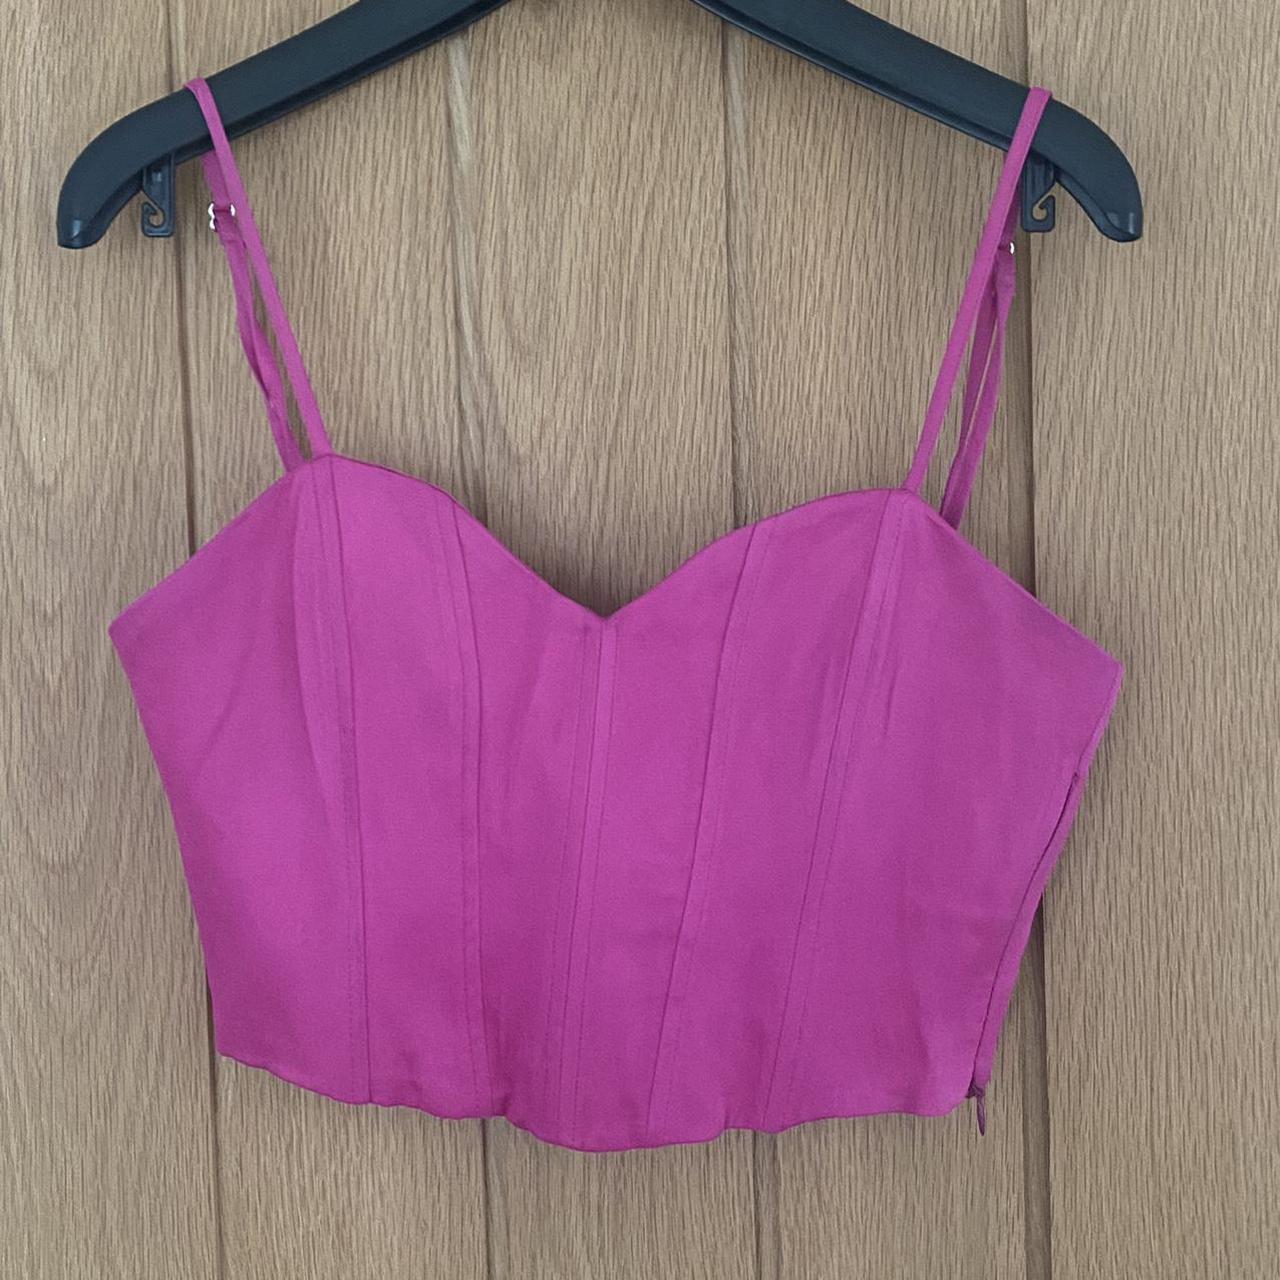 Zara- Pink Corset Top NEW WITH TAGS! – DETOURE